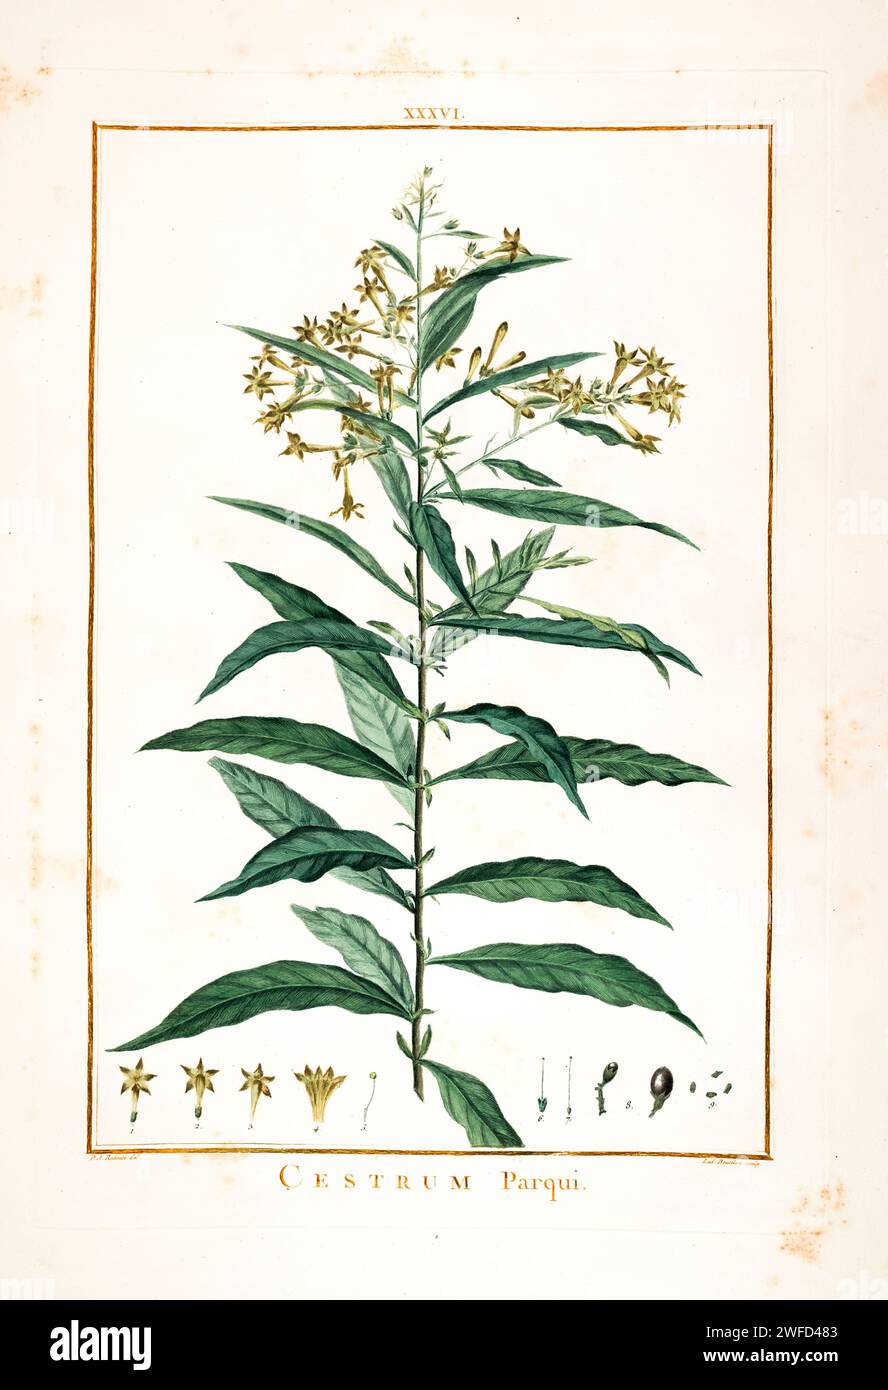 Cestrum parqui Hand Painted by Pierre-Joseph Redouté and published in Stirpes Novae aut Minus Cognitae (1784) by Charles Louis L'Héritier de Brutelle. Cestrum is a genus of 150-250 species of flowering plants in the family Solanaceae. They are native to warm temperate to tropical regions of the Americas, Stock Photo